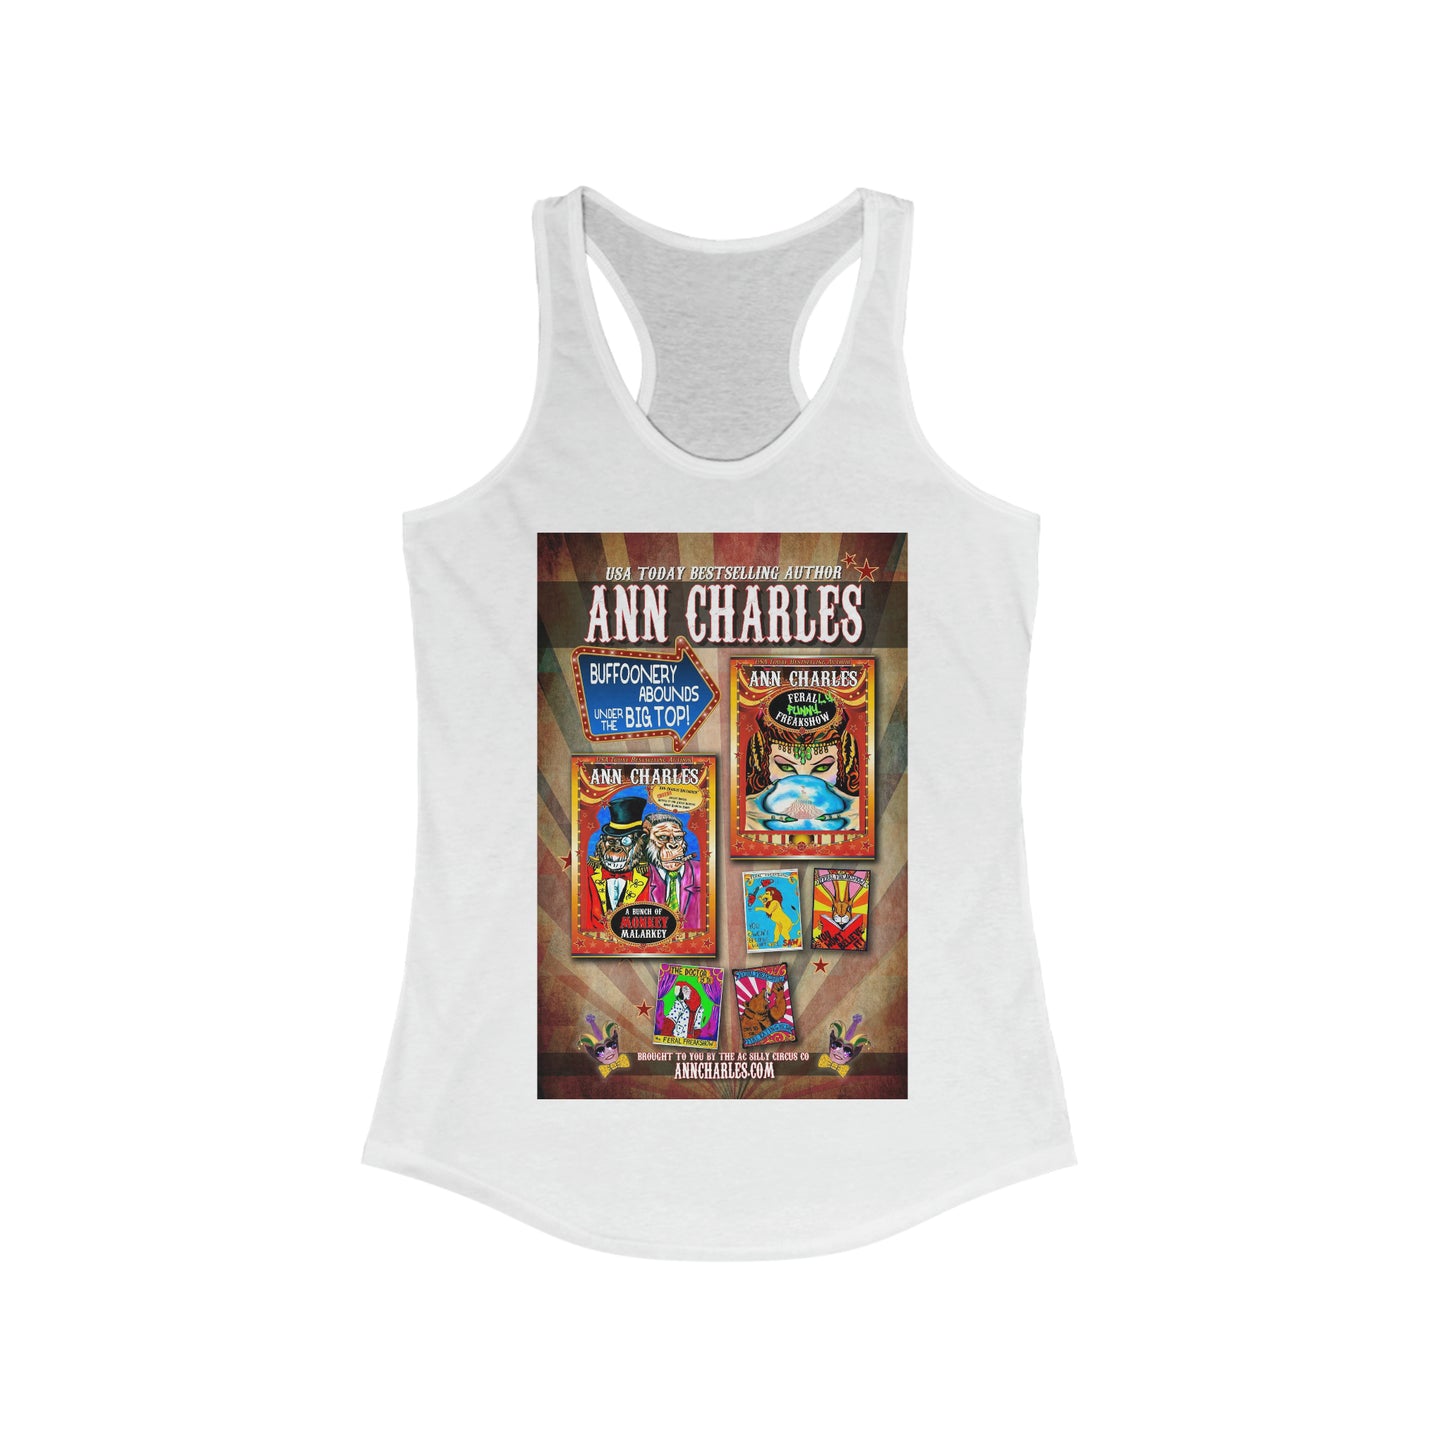 AC Silly Circus Poster - Women's Ideal Racerback Tank